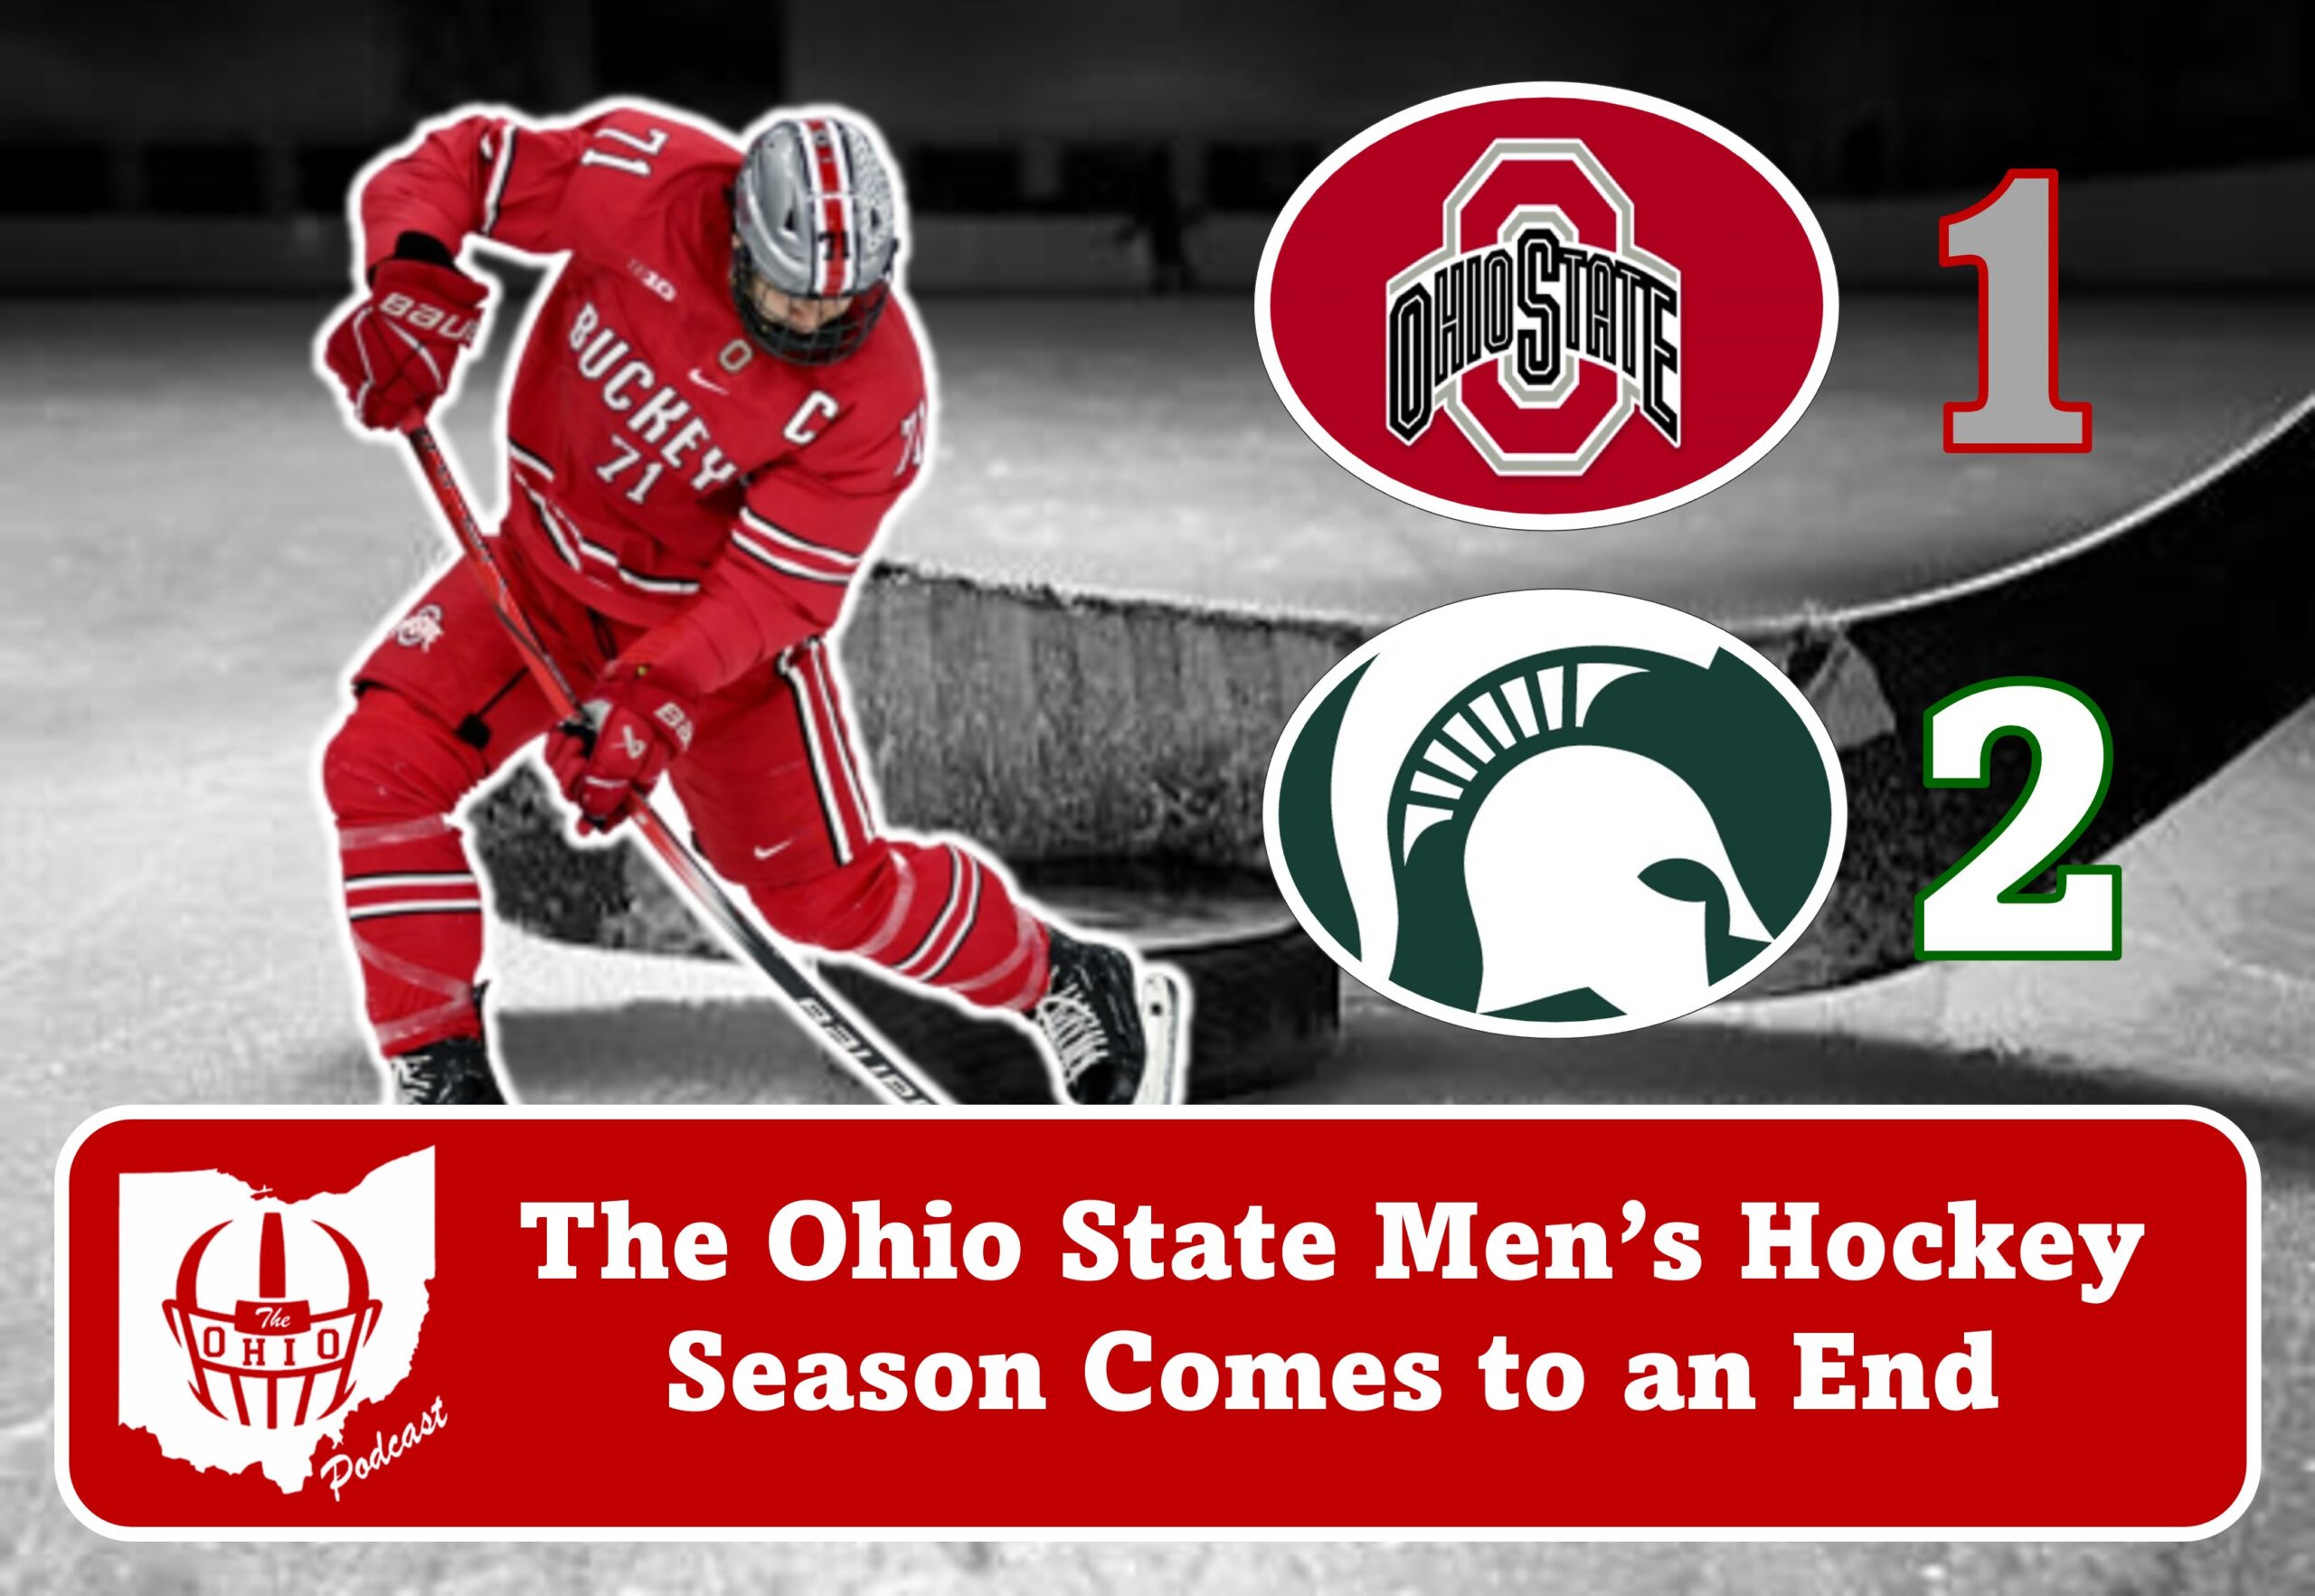 Ohio State Men’s Hockey Season Ends in Quarterfinals Against Michigan State